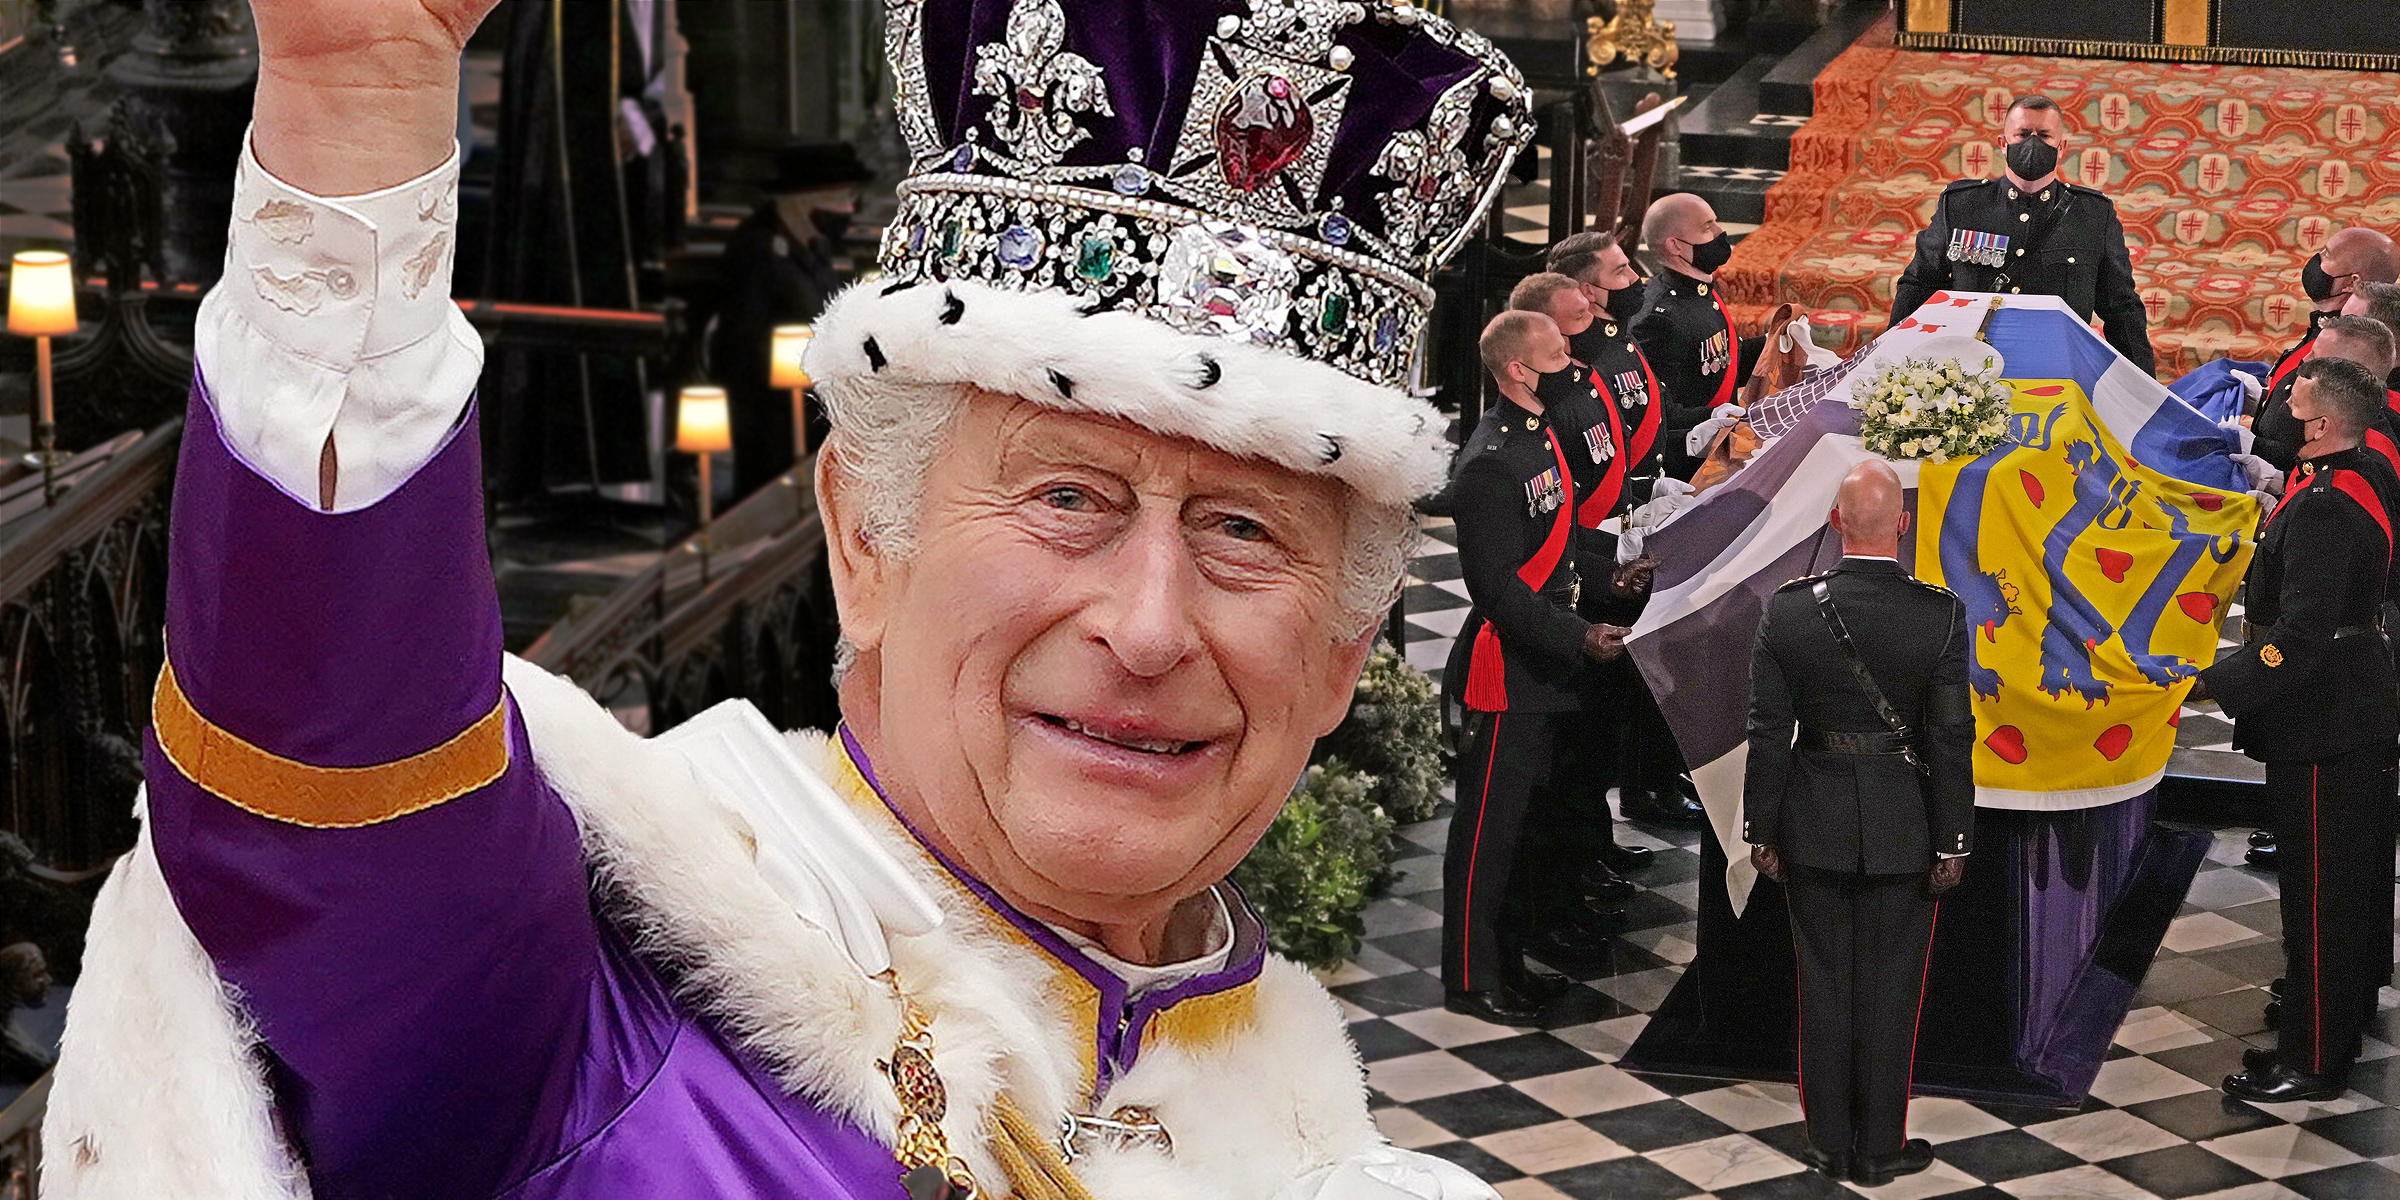 King Charles III on May 6, 2023 | Prince Phillips funeral on April 17, 2021 | Source: Getty Images